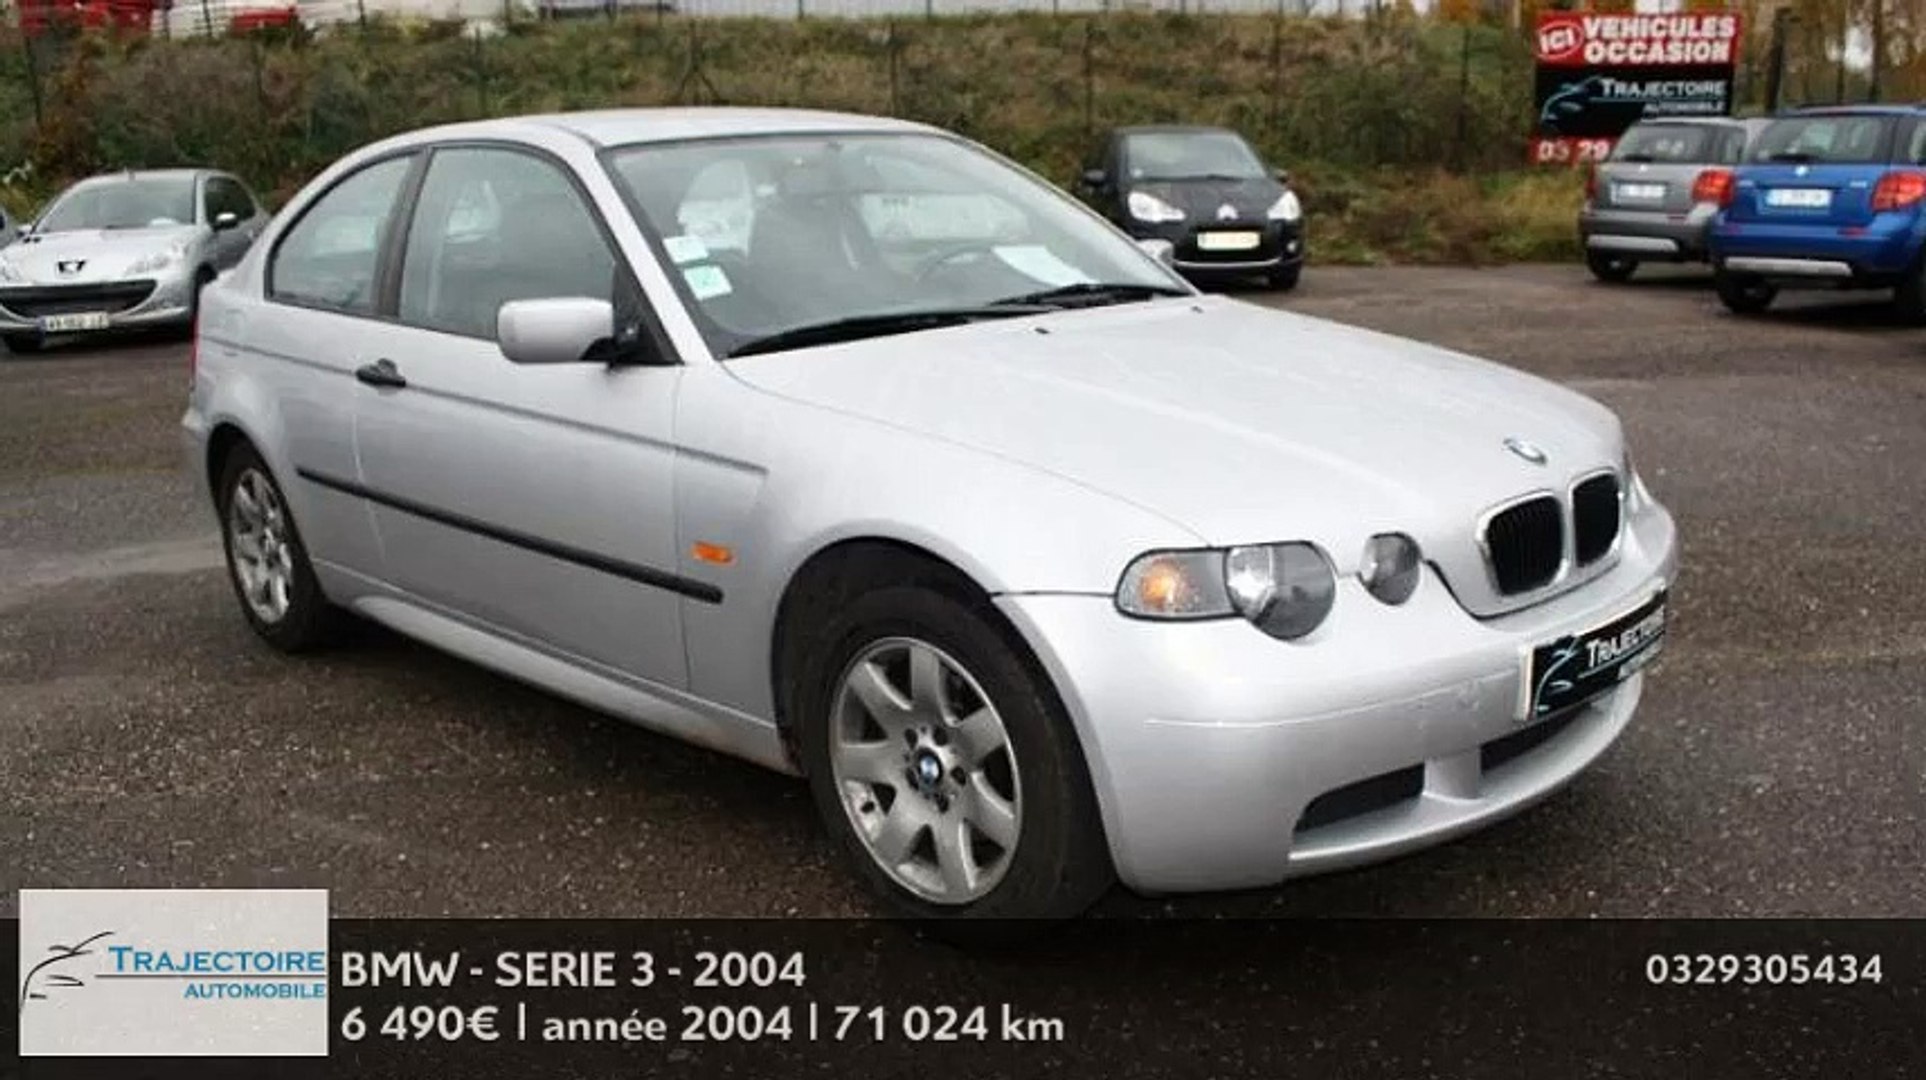 Annonce Occasion BMW Serie 3 Compact 318td Pack Sport 2004 - Vidéo  Dailymotion